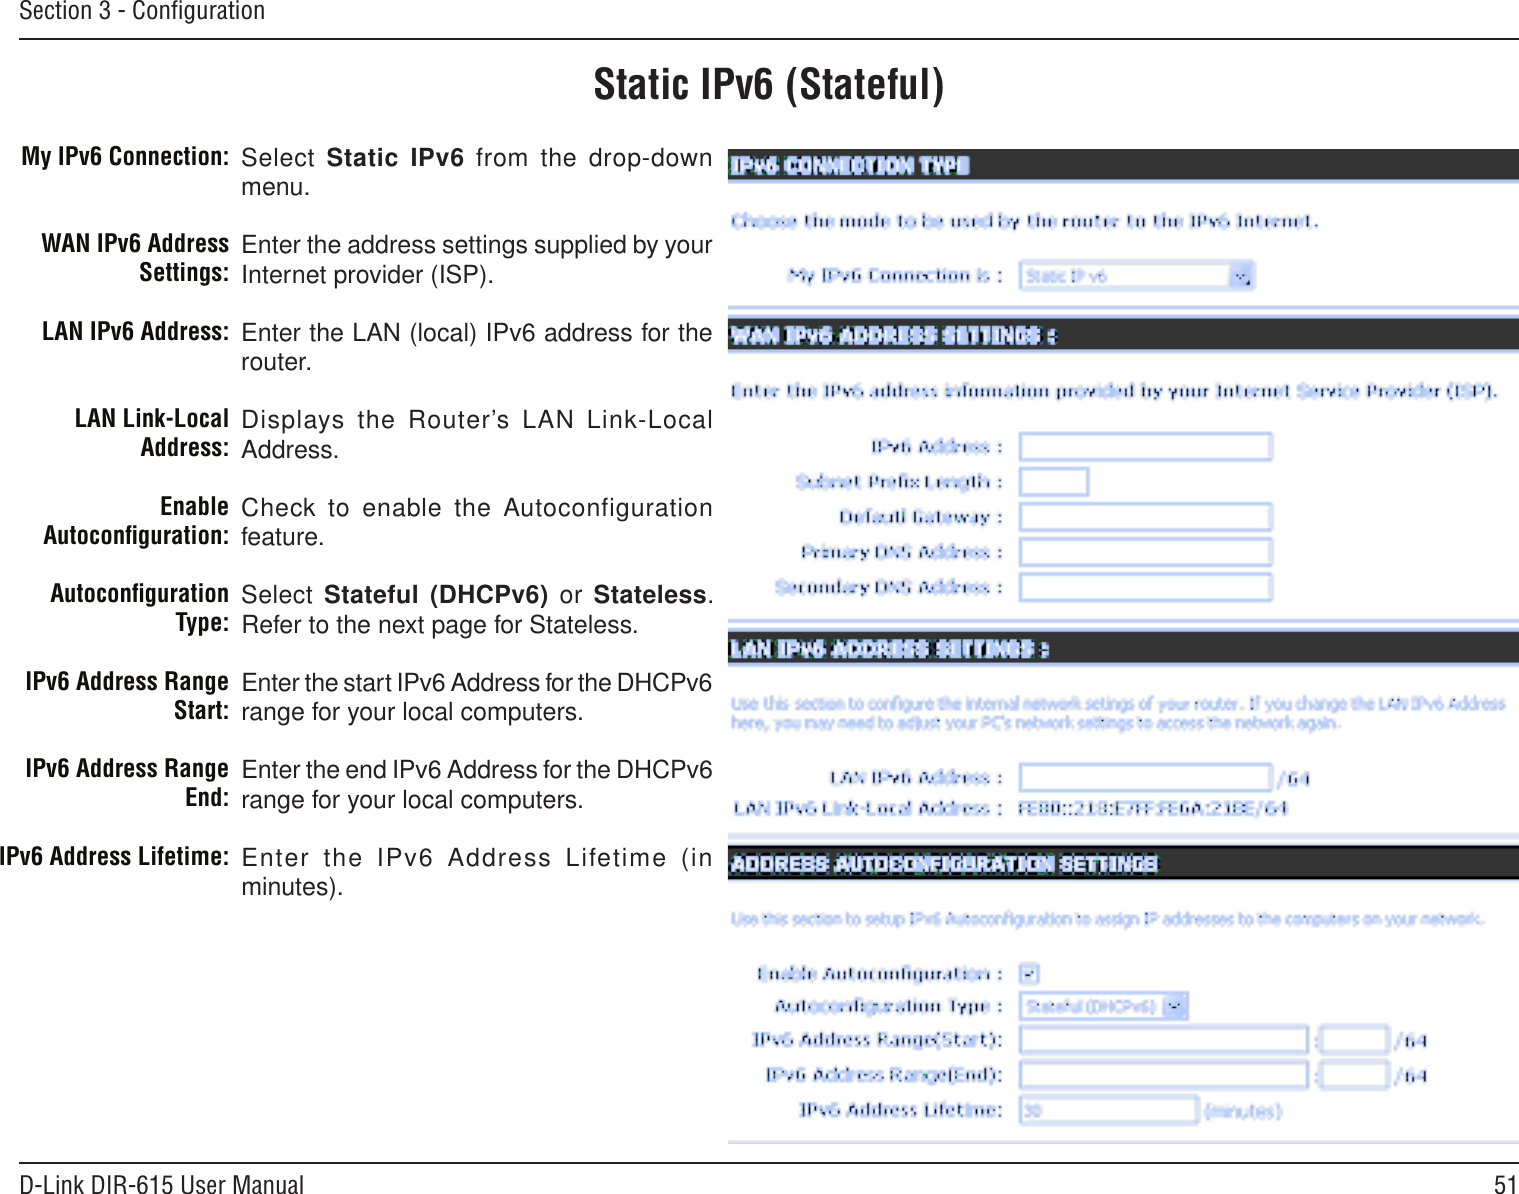 51D-Link DIR-615 User ManualSection 3 - ConﬁgurationStatic IPv6 (Stateful)Select Static IPv6 from the drop-down menu.Enter the address settings supplied by your Internet provider (ISP). Enter the LAN (local) IPv6 address for the router. Displays the Router’s LAN Link-Local Address.Check to enable the Autoconfiguration feature.Select Stateful (DHCPv6)  or  Stateless. Refer to the next page for Stateless.Enter the start IPv6 Address for the DHCPv6 range for your local computers.Enter the end IPv6 Address for the DHCPv6 range for your local computers.Enter  the  IPv6  Address  Lifetime  (in minutes).My IPv6 Connection:WAN IPv6 Address Settings:LAN IPv6 Address:LAN Link-Local Address:Enable Autoconﬁguration:Autoconﬁguration Type:IPv6 Address Range Start:IPv6 Address Range End:IPv6 Address Lifetime: